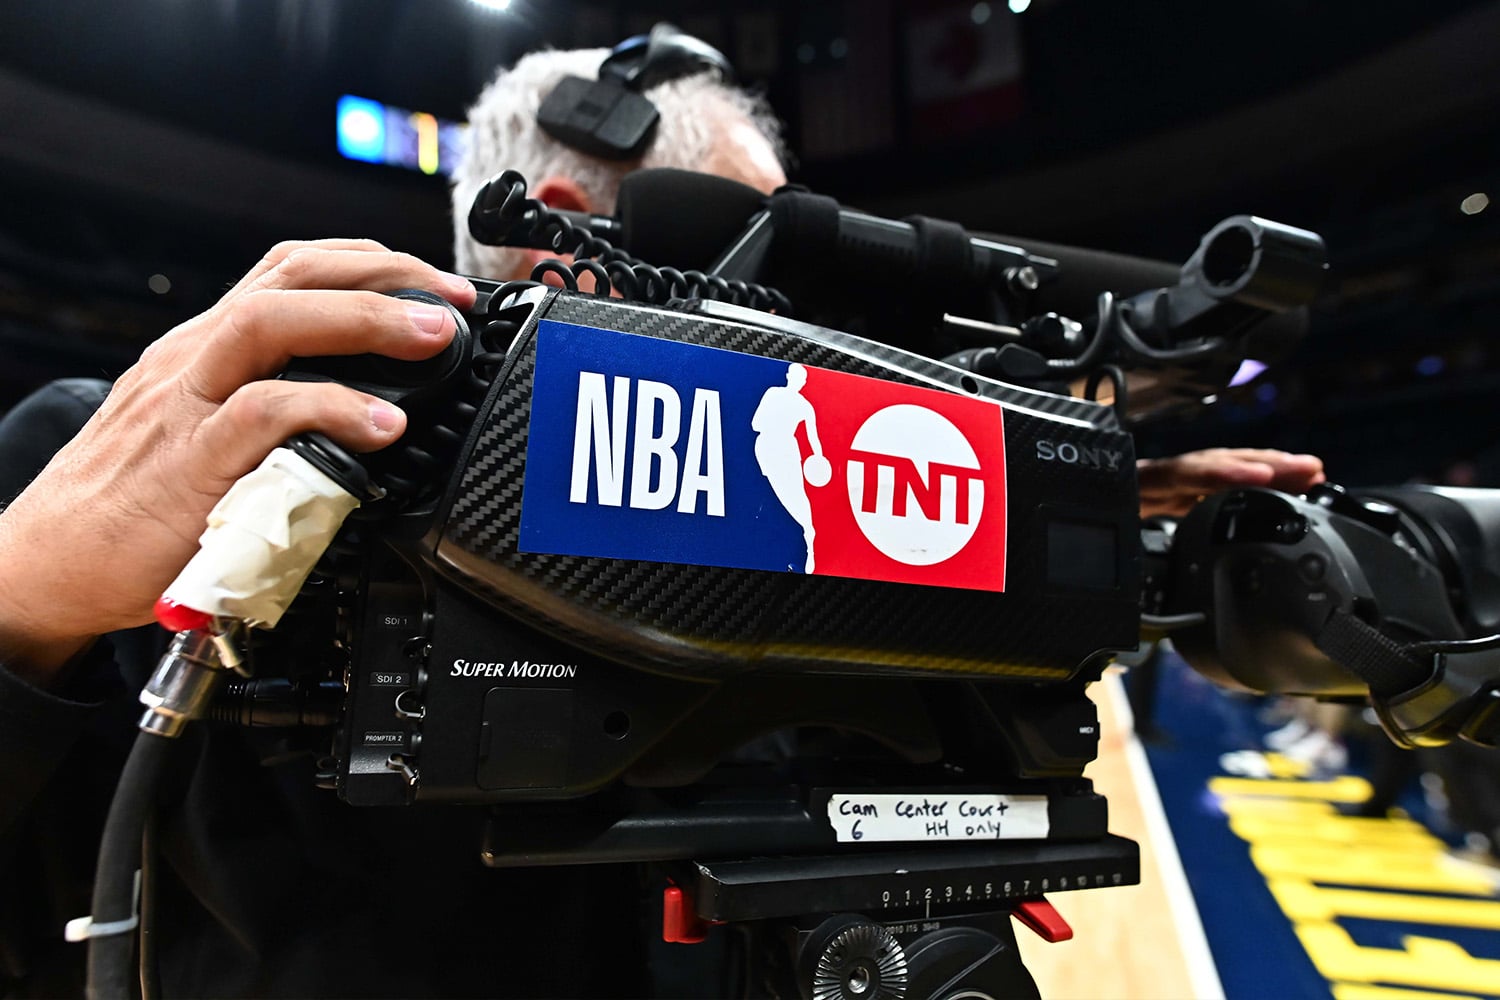 Which NBA games will stream on Max? Looking at Warner Bros. announcing  broadcast of matches on cable TV